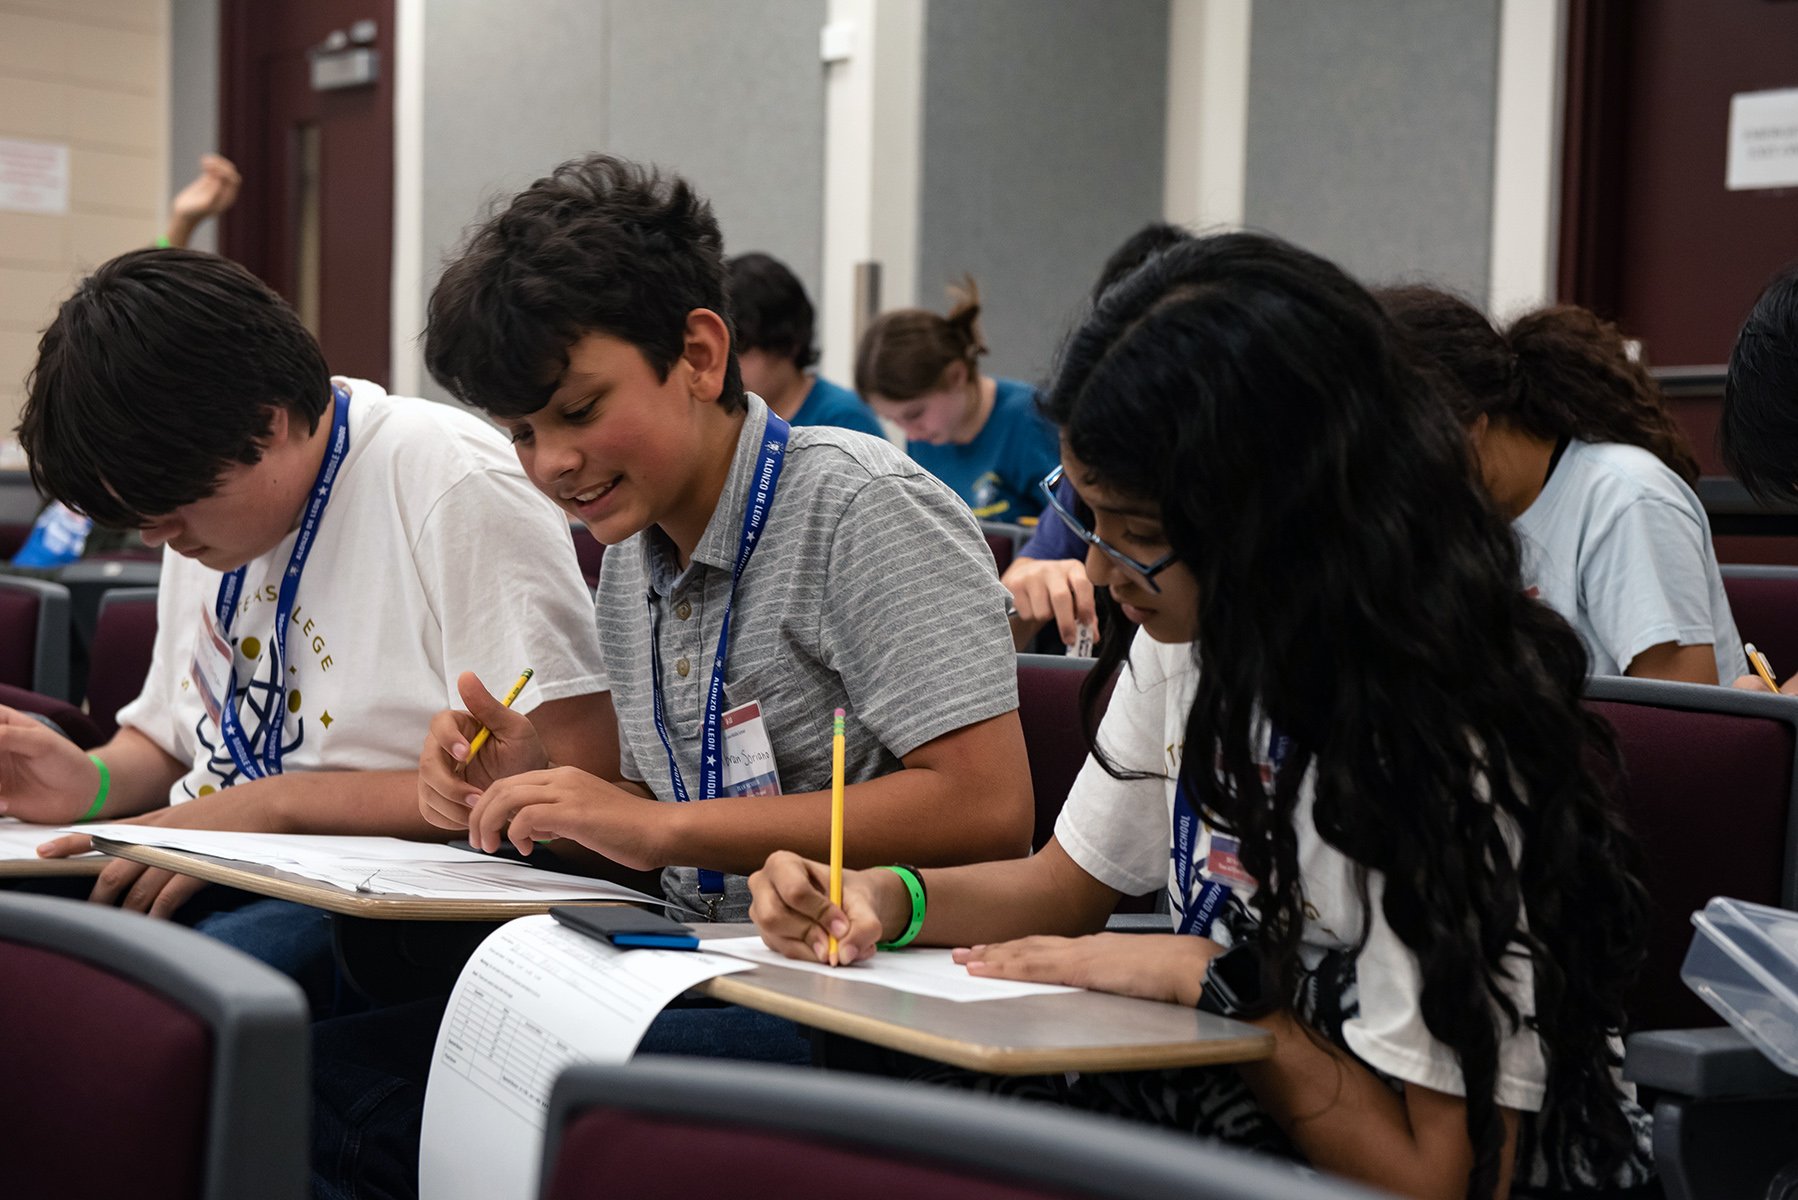 The 22nd Annual Texas Science Olympiad to be Hosted at Texas A&M University